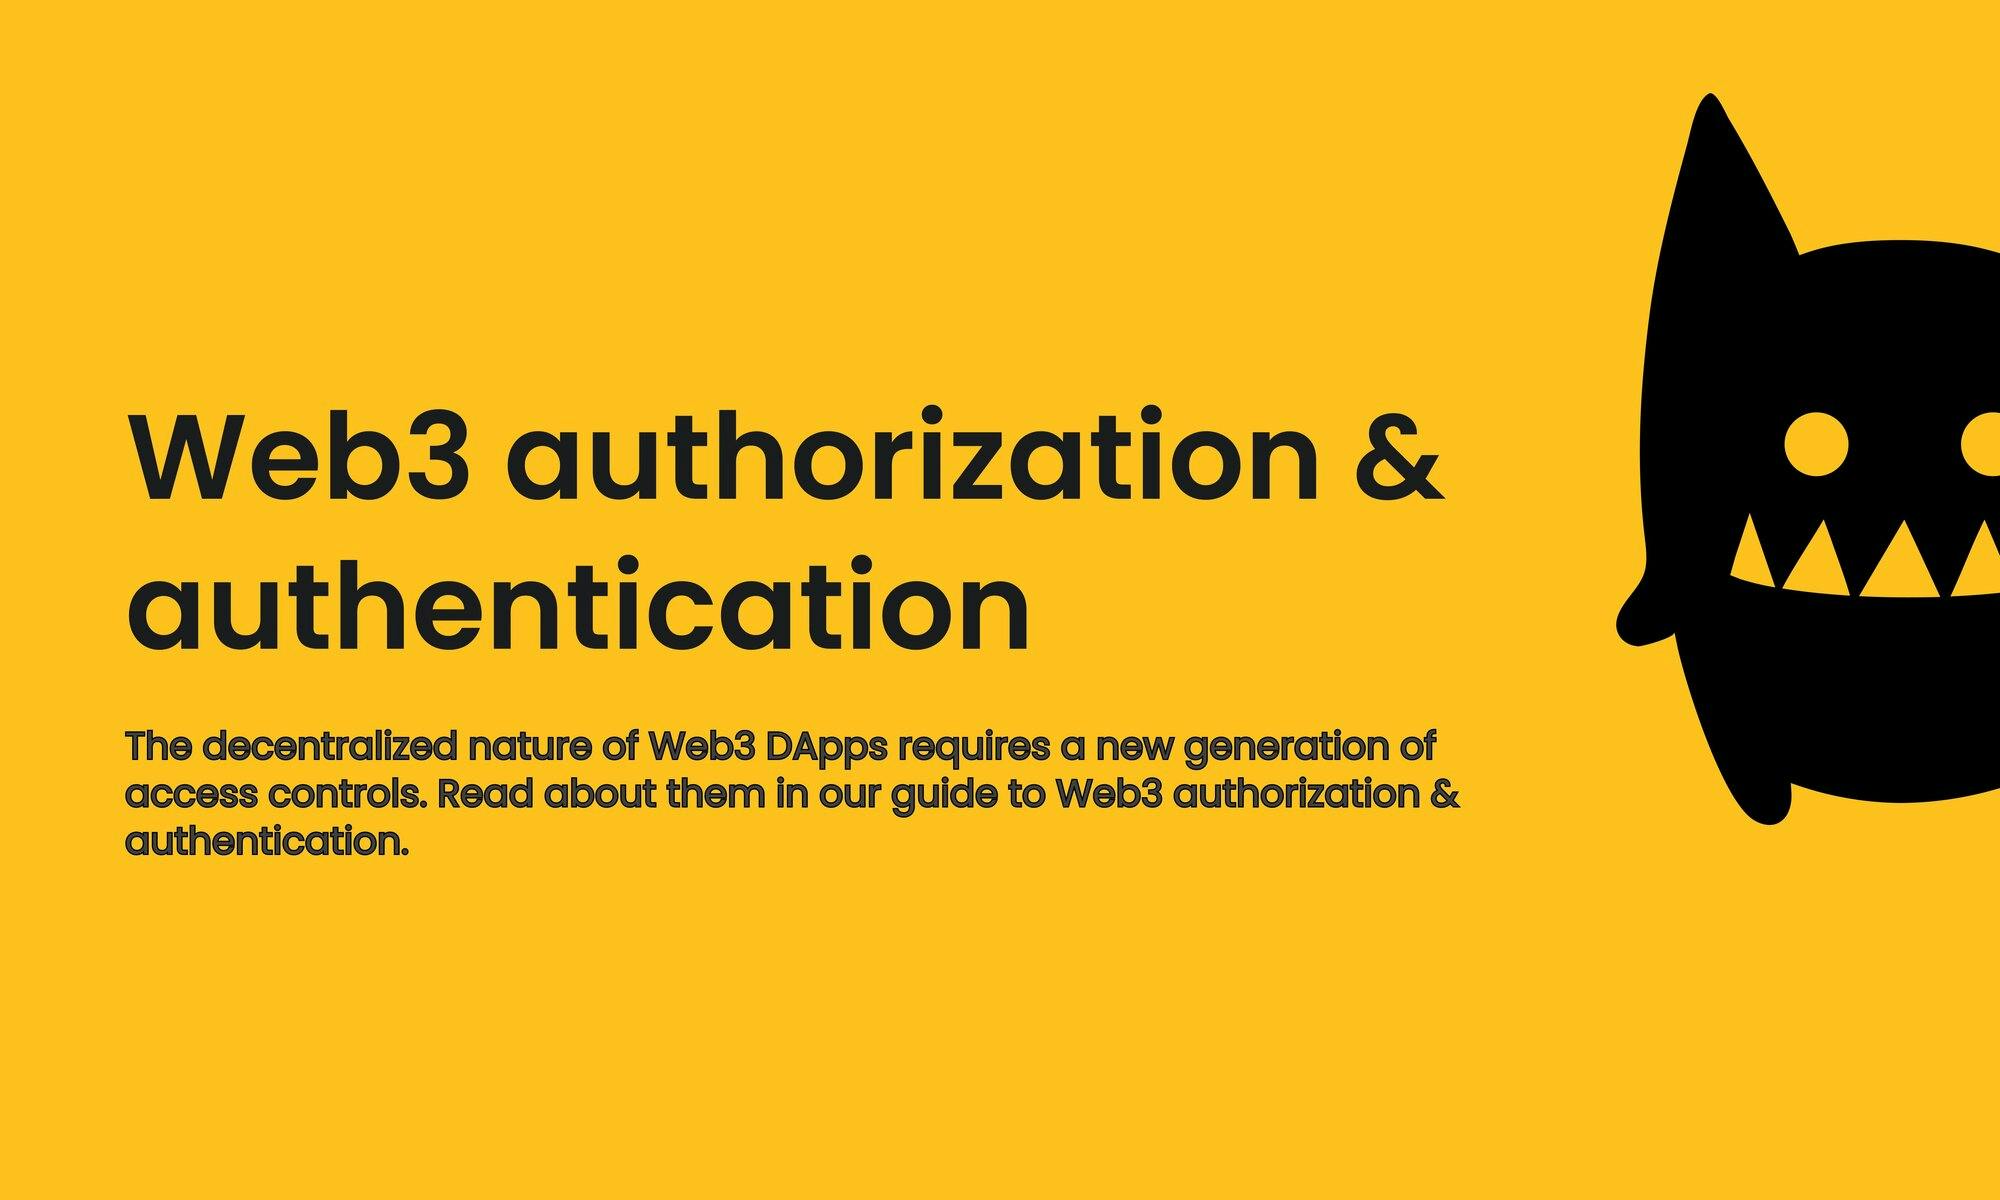 Guide to Web3 authorization & authentication